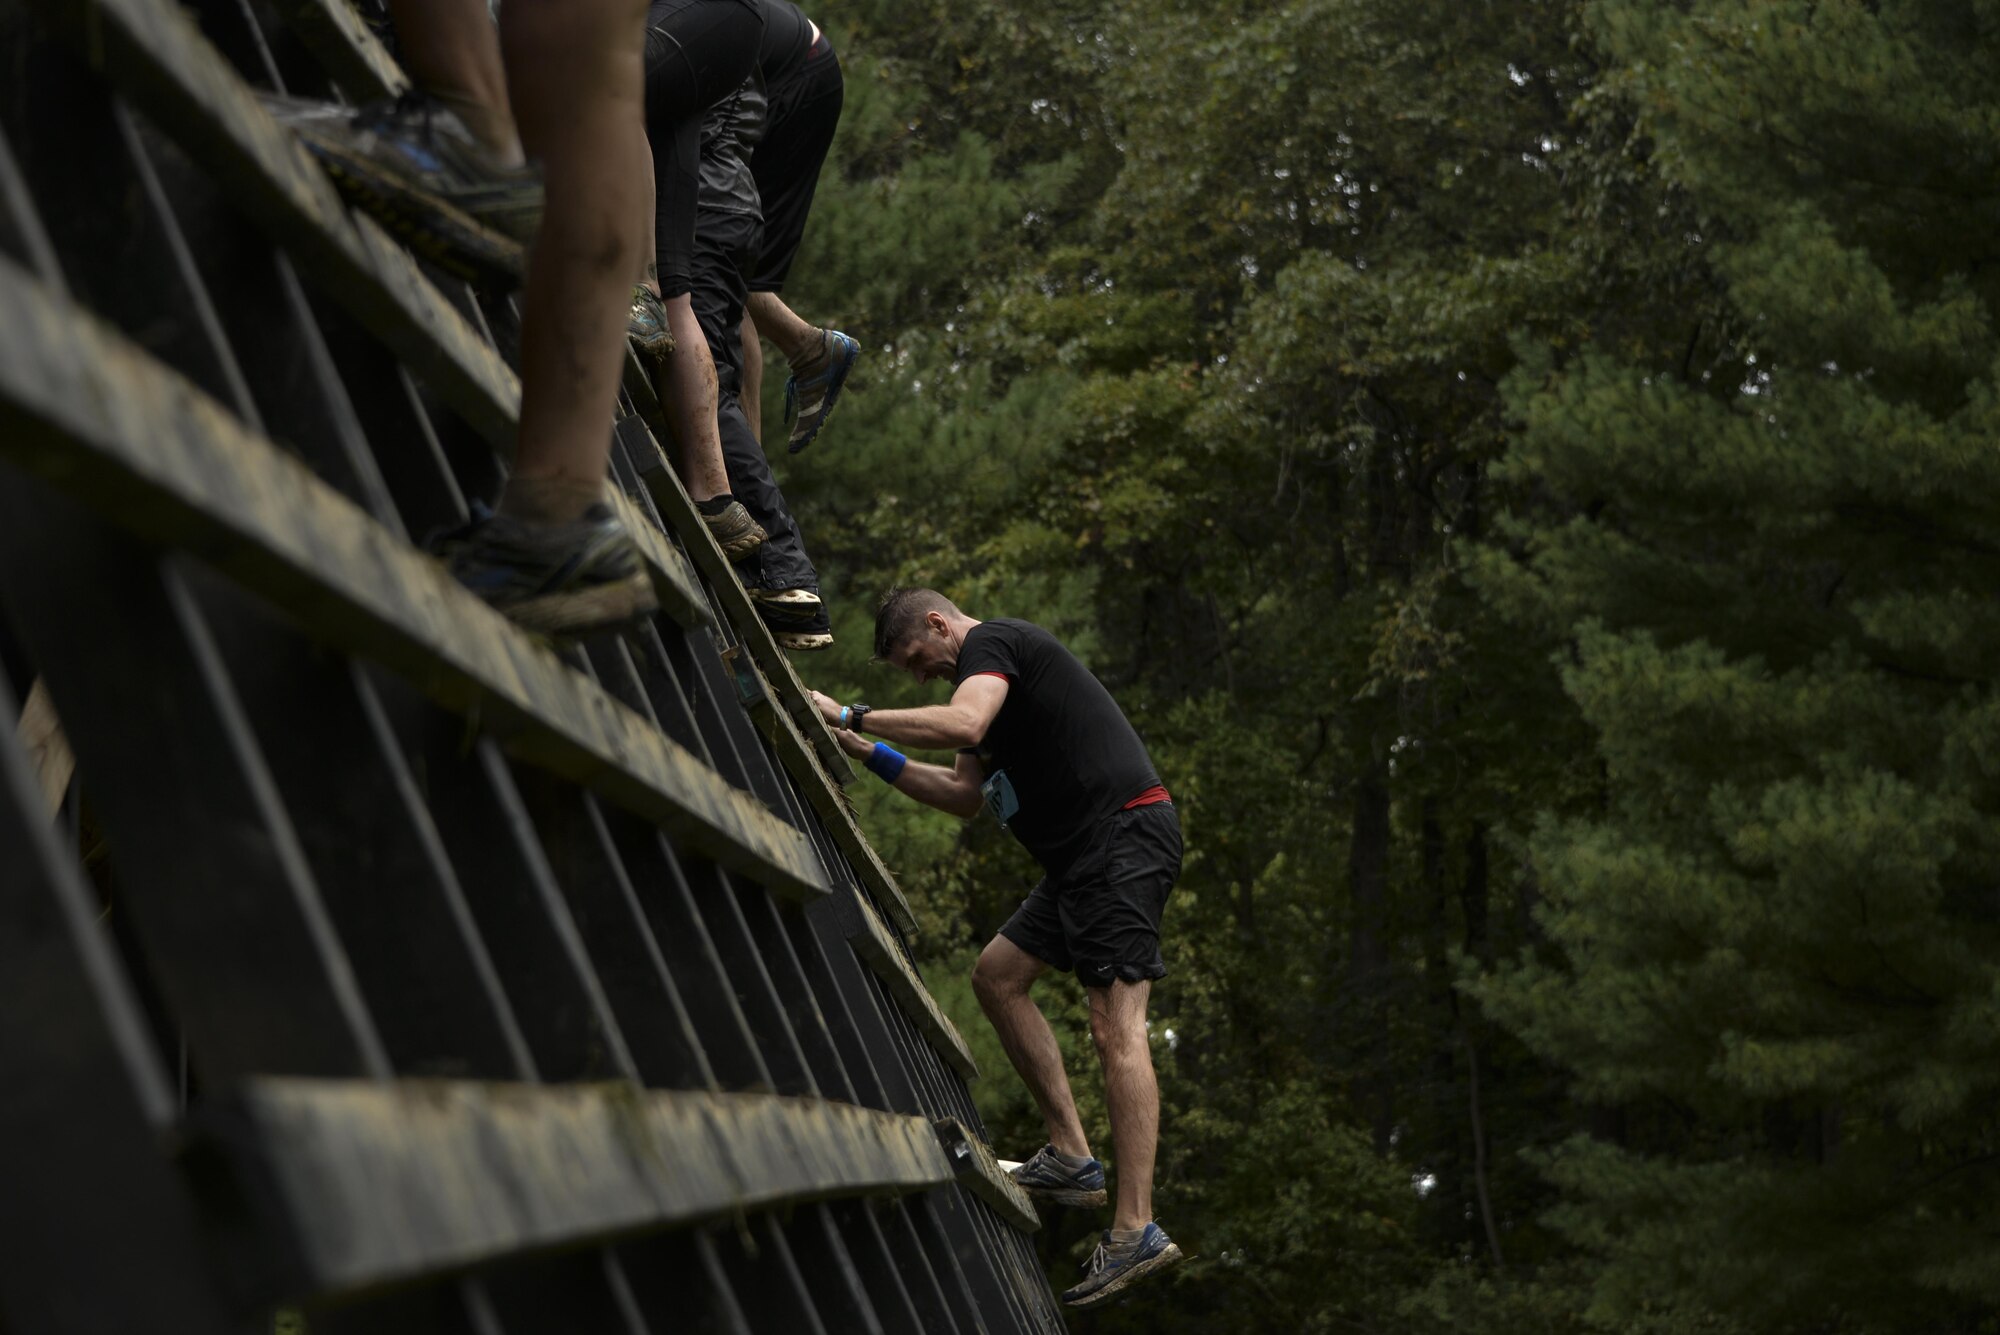 Col. Gregory Gillinger, 70th Intelligence, Surveillance and Reconnaissance Wing vice commander, climbs up a wooden ladder during the 2016 Savage Race October 8, 2016 at Kennedyville, Md. 70th ISRW participants endured a seven-mile obstacle course of cargo net walls, creeks, ice cold water and climbing to test their stamina and strength as a team. (U.S. Air Force photo/Staff Sgt. Alexandre Montes)